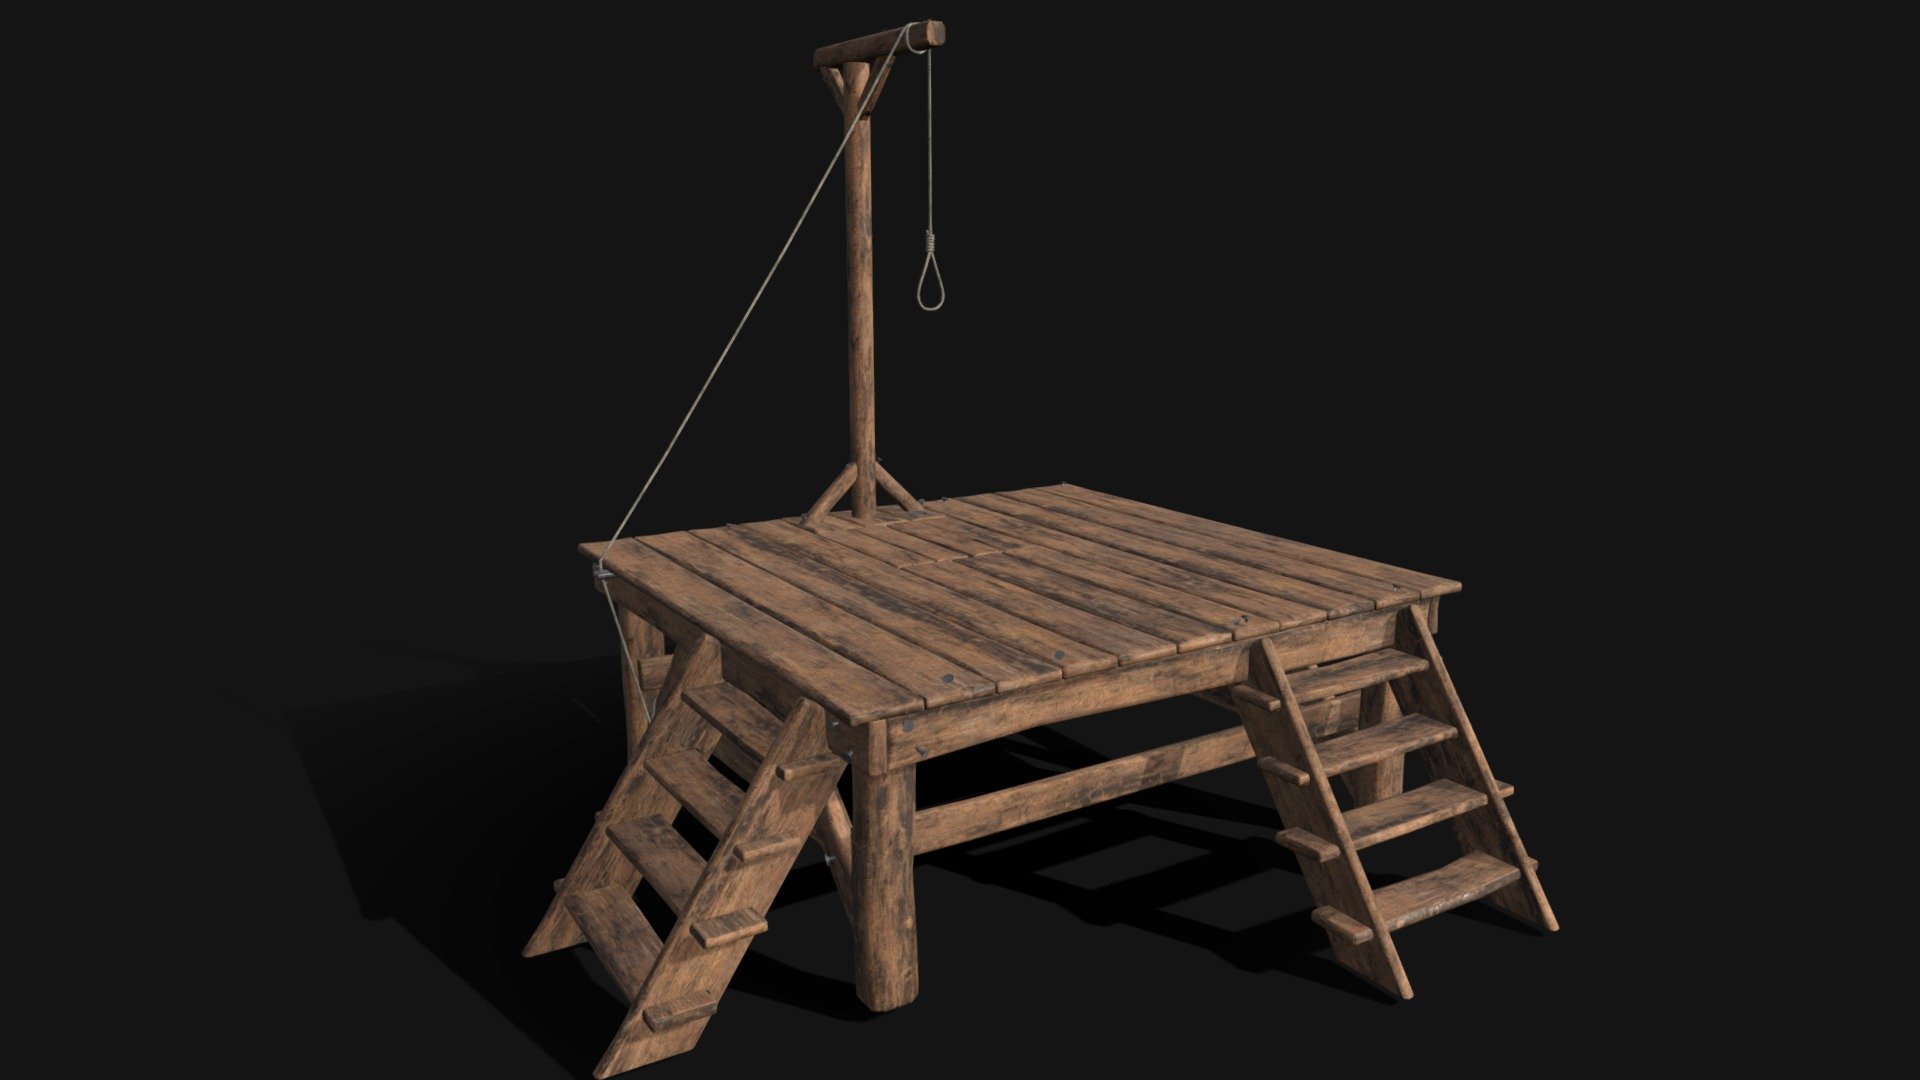 Gallow And Execution Platform 3D Model. This model contains the Gallow And Execution Platform itself 

All modeled in Maya, textured with Substance Painter.

The model was built to scale and is UV unwrapped properly

⦁   33552 tris. 

⦁   Contains: .FBX .OBJ and .DAE

⦁   Model has clean topology. No Ngons.

⦁   Built to scale

⦁   Unwrapped UV Map

⦁   4K Texture set

⦁   High quality details

⦁   Based on real life references

⦁   Renders done in Marmoset Toolbag

Polycount: 

Verts 17284

Edges 34452

Faces 17303

Tris 33552 

If you have any questions please feel free to ask me 3d model